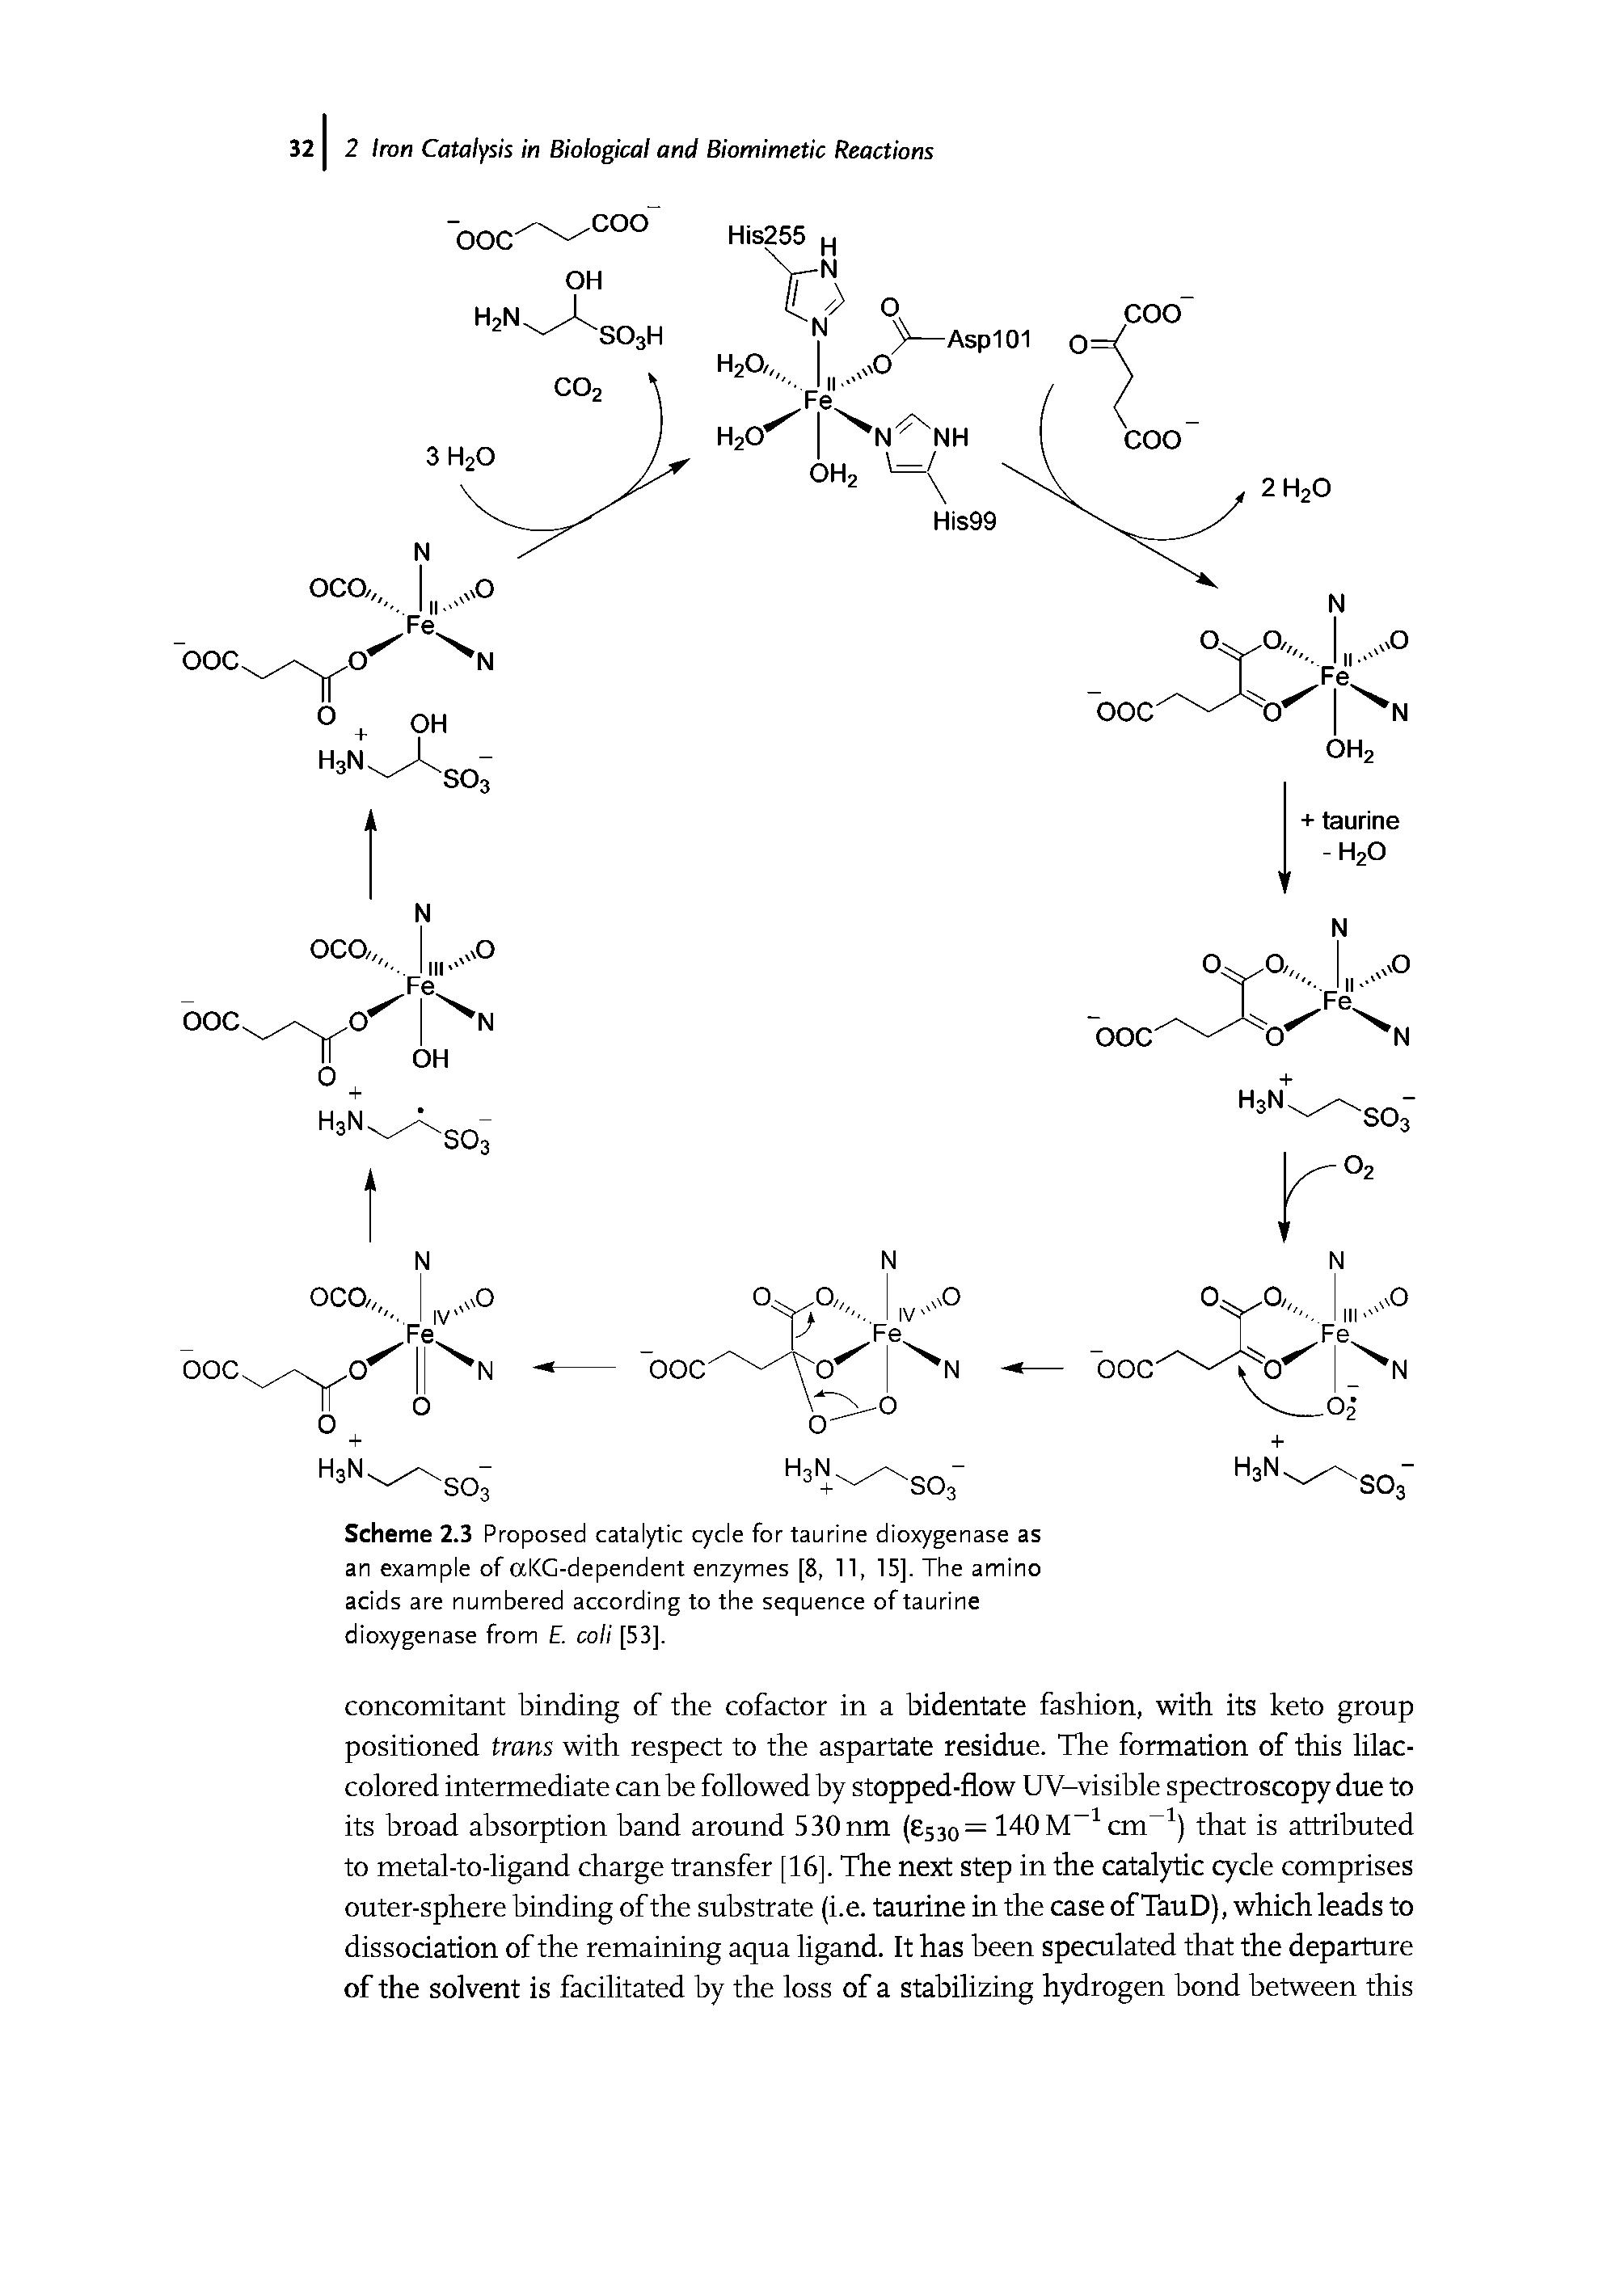 Scheme 2.3 Proposed catalytic cycle for taurine dioxygenase as an example of aKG-dependent enzymes [8, 11, 15], The amino acids are numbered according to the sequence of taurine dioxygenase from E. coli [53],...